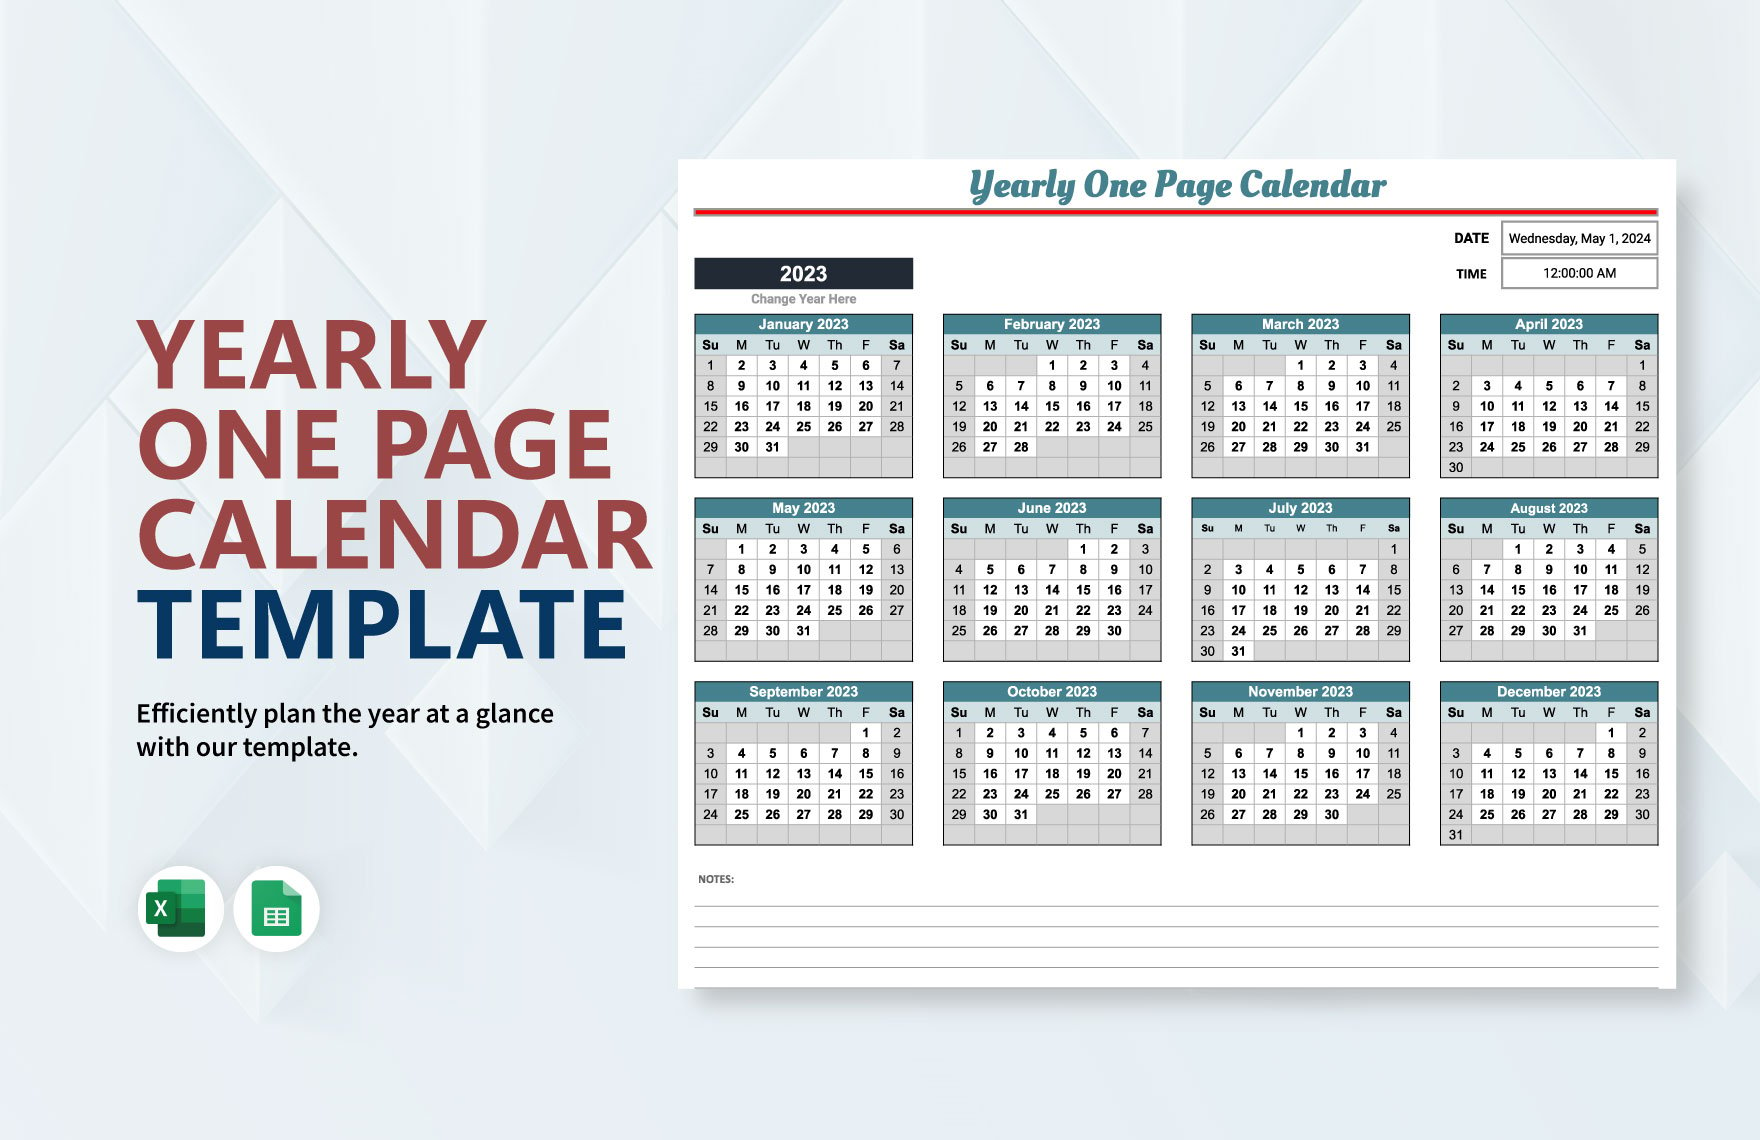 Yearly One Page Calendar Template in Excel, Google Sheets